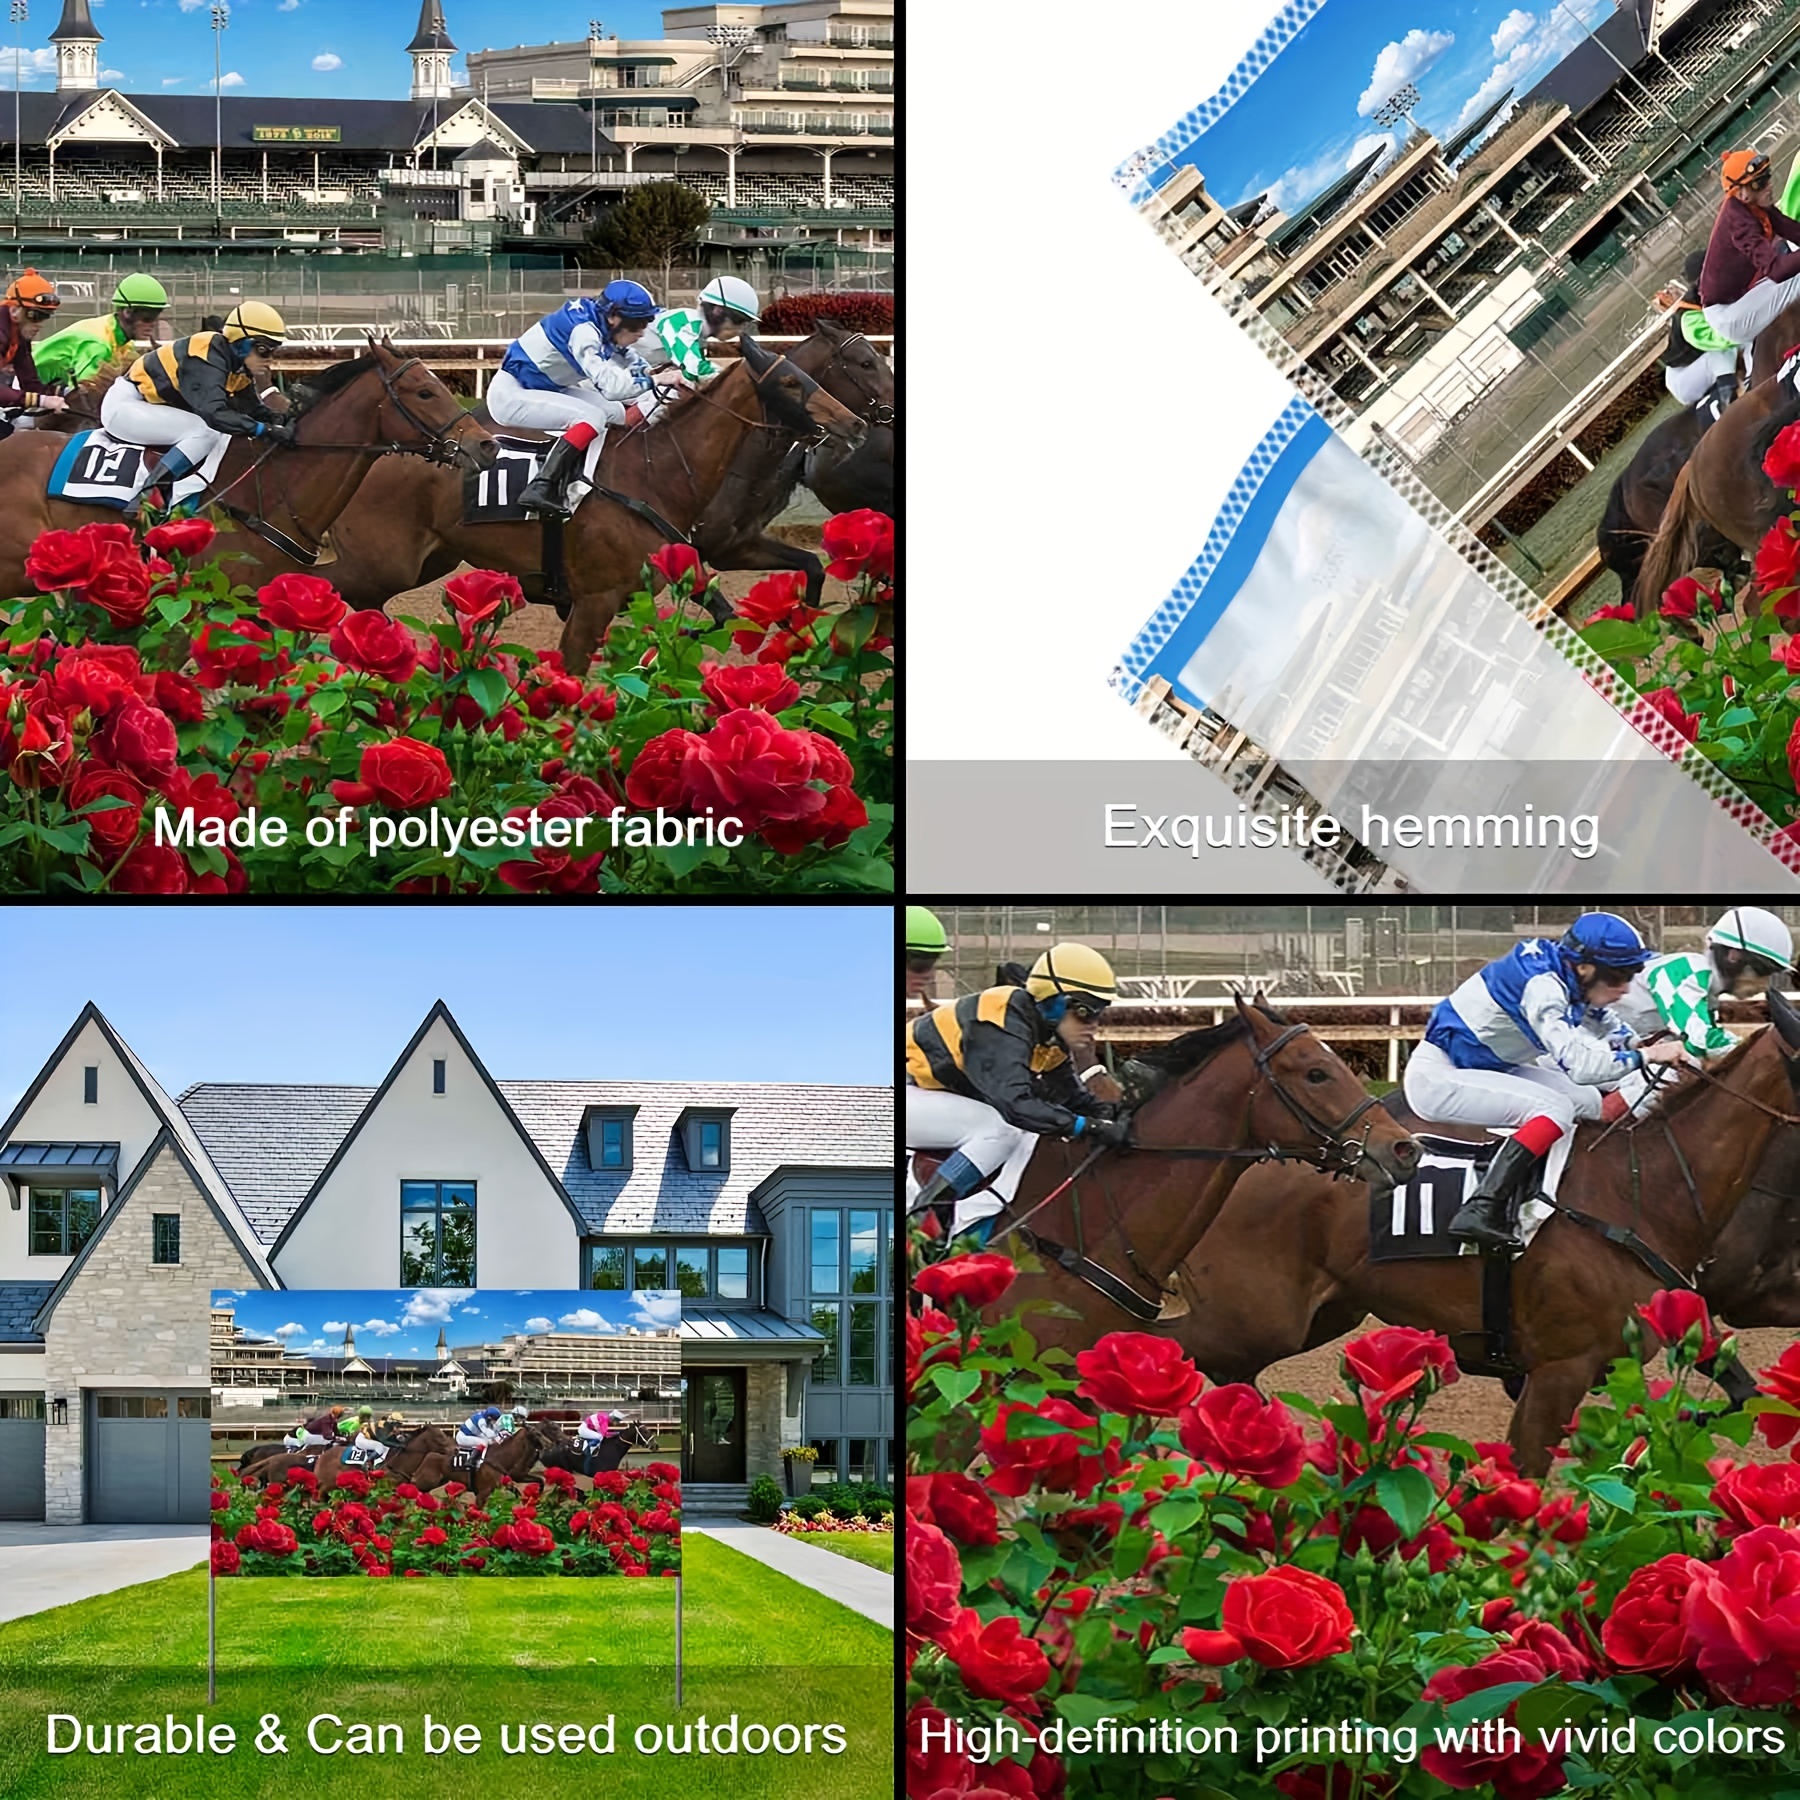  Kentucky Derby Backdrop, Kentucky Derby Decorations Run for The  Roses Party Supplies, Horse Racing Themed Party Photography Background for  Derby Day Party Supplies : Electronics